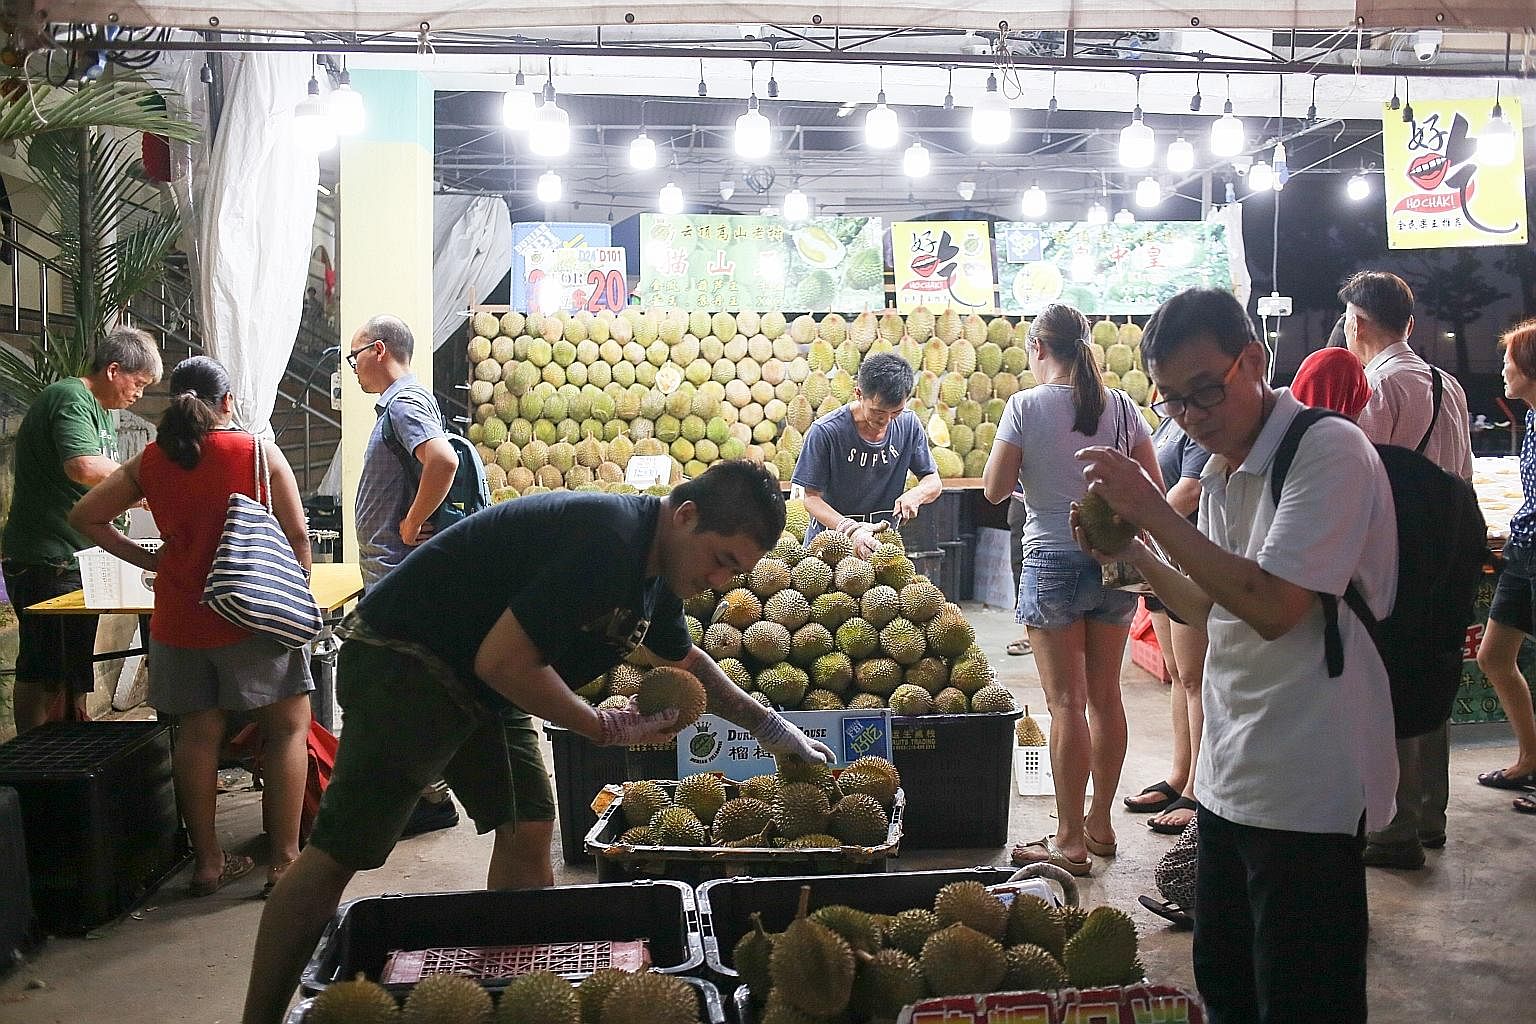 Mr Sky Teo (foreground, left), stall manager of Durian Fullhouse near Kovan market and food centre, said sales may not increase even though he is bringing in 30 55kg cartons of durians a day.